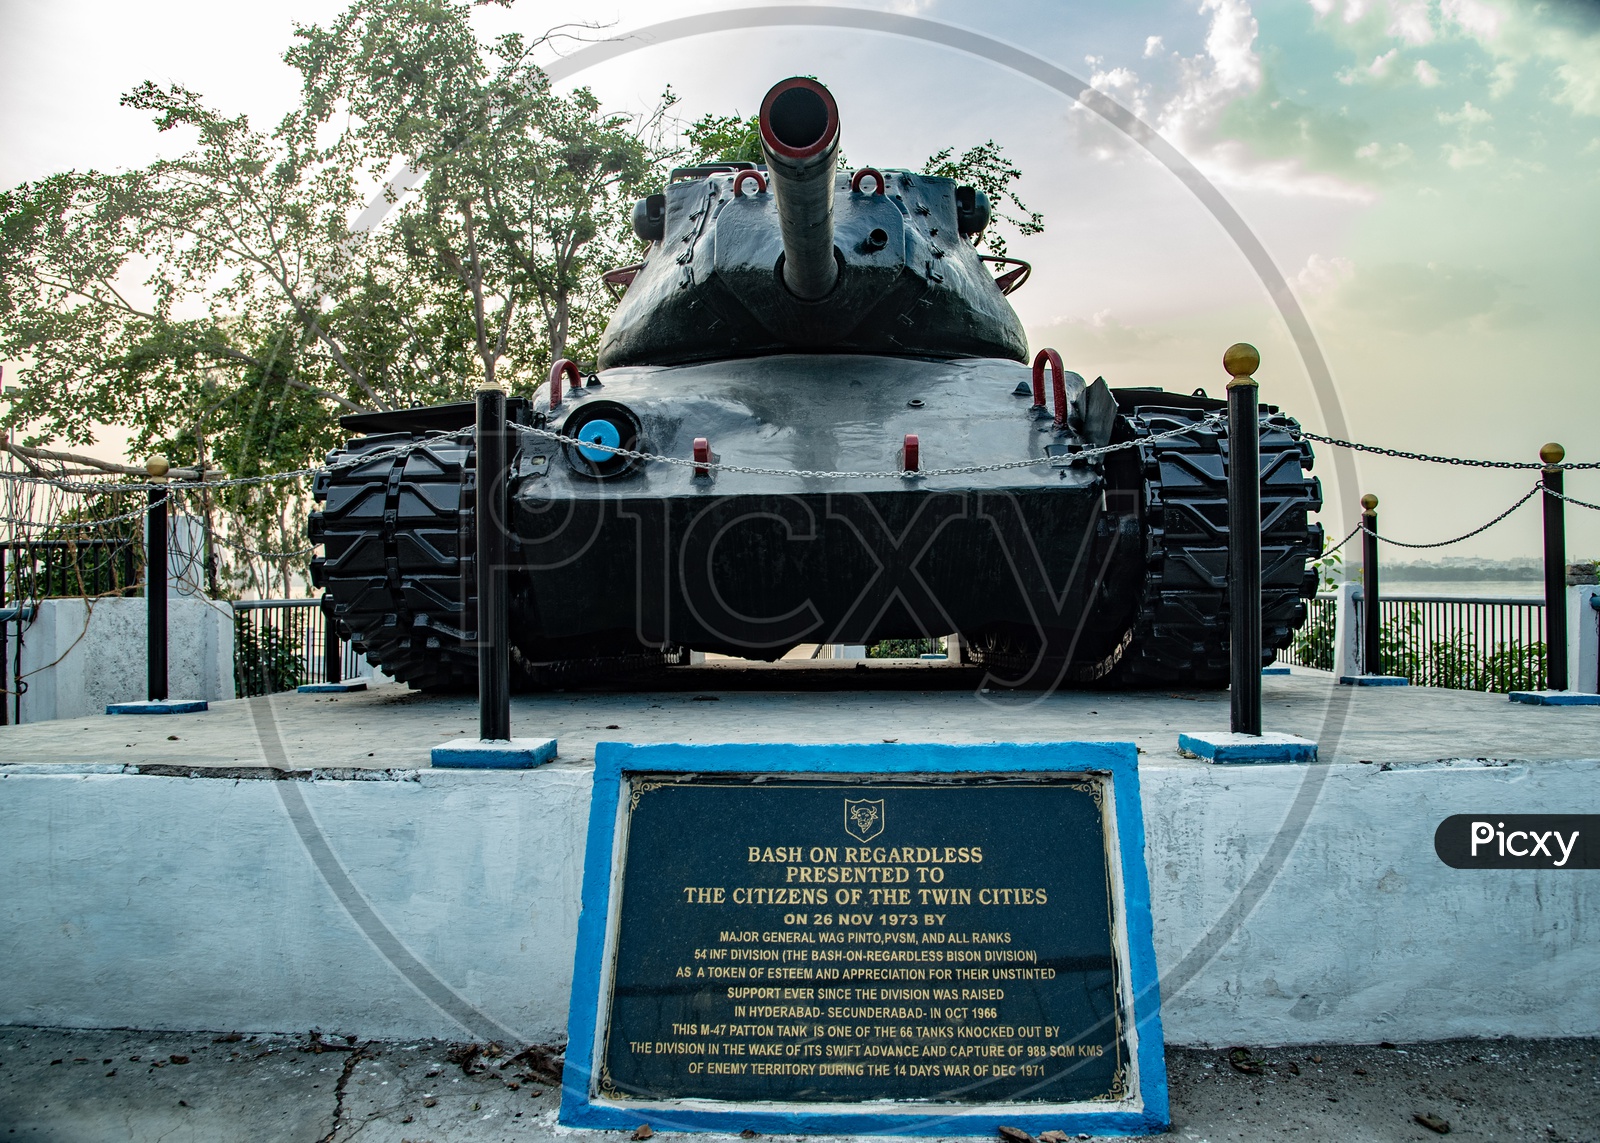 The Tank after with the Tank Bund Road gets its name.